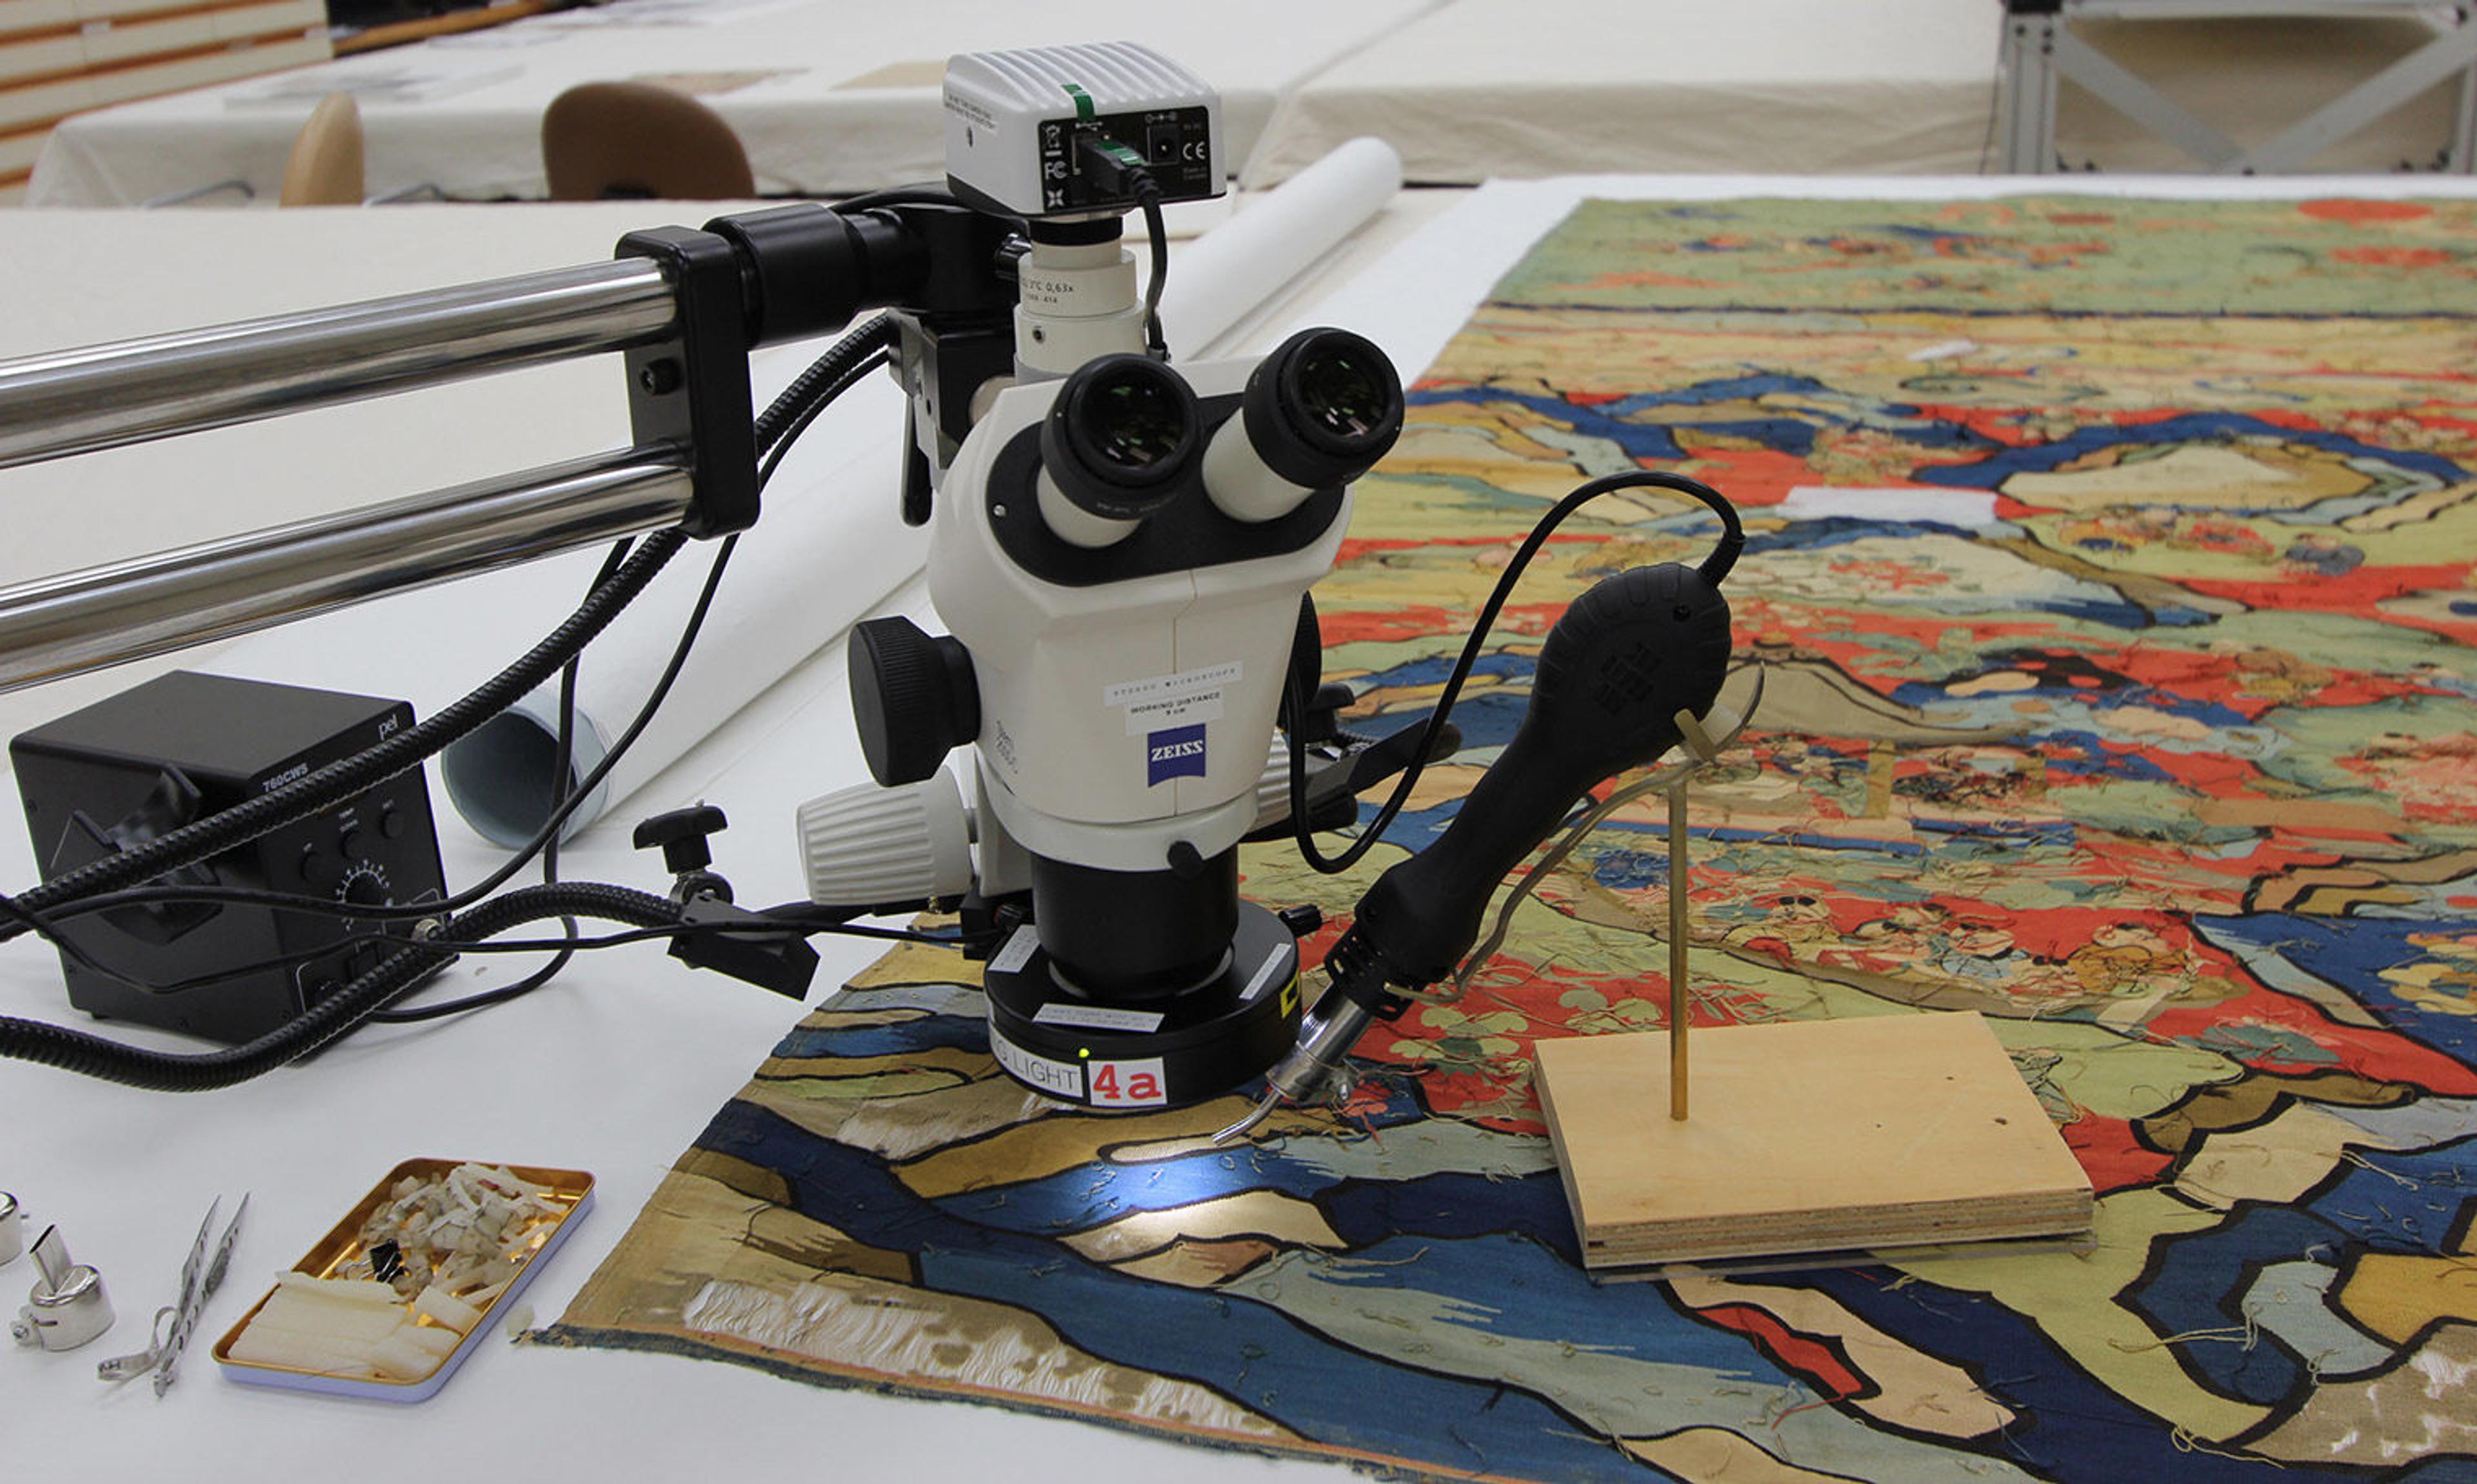 A white and black machine used to remove adhesive from the tapestry